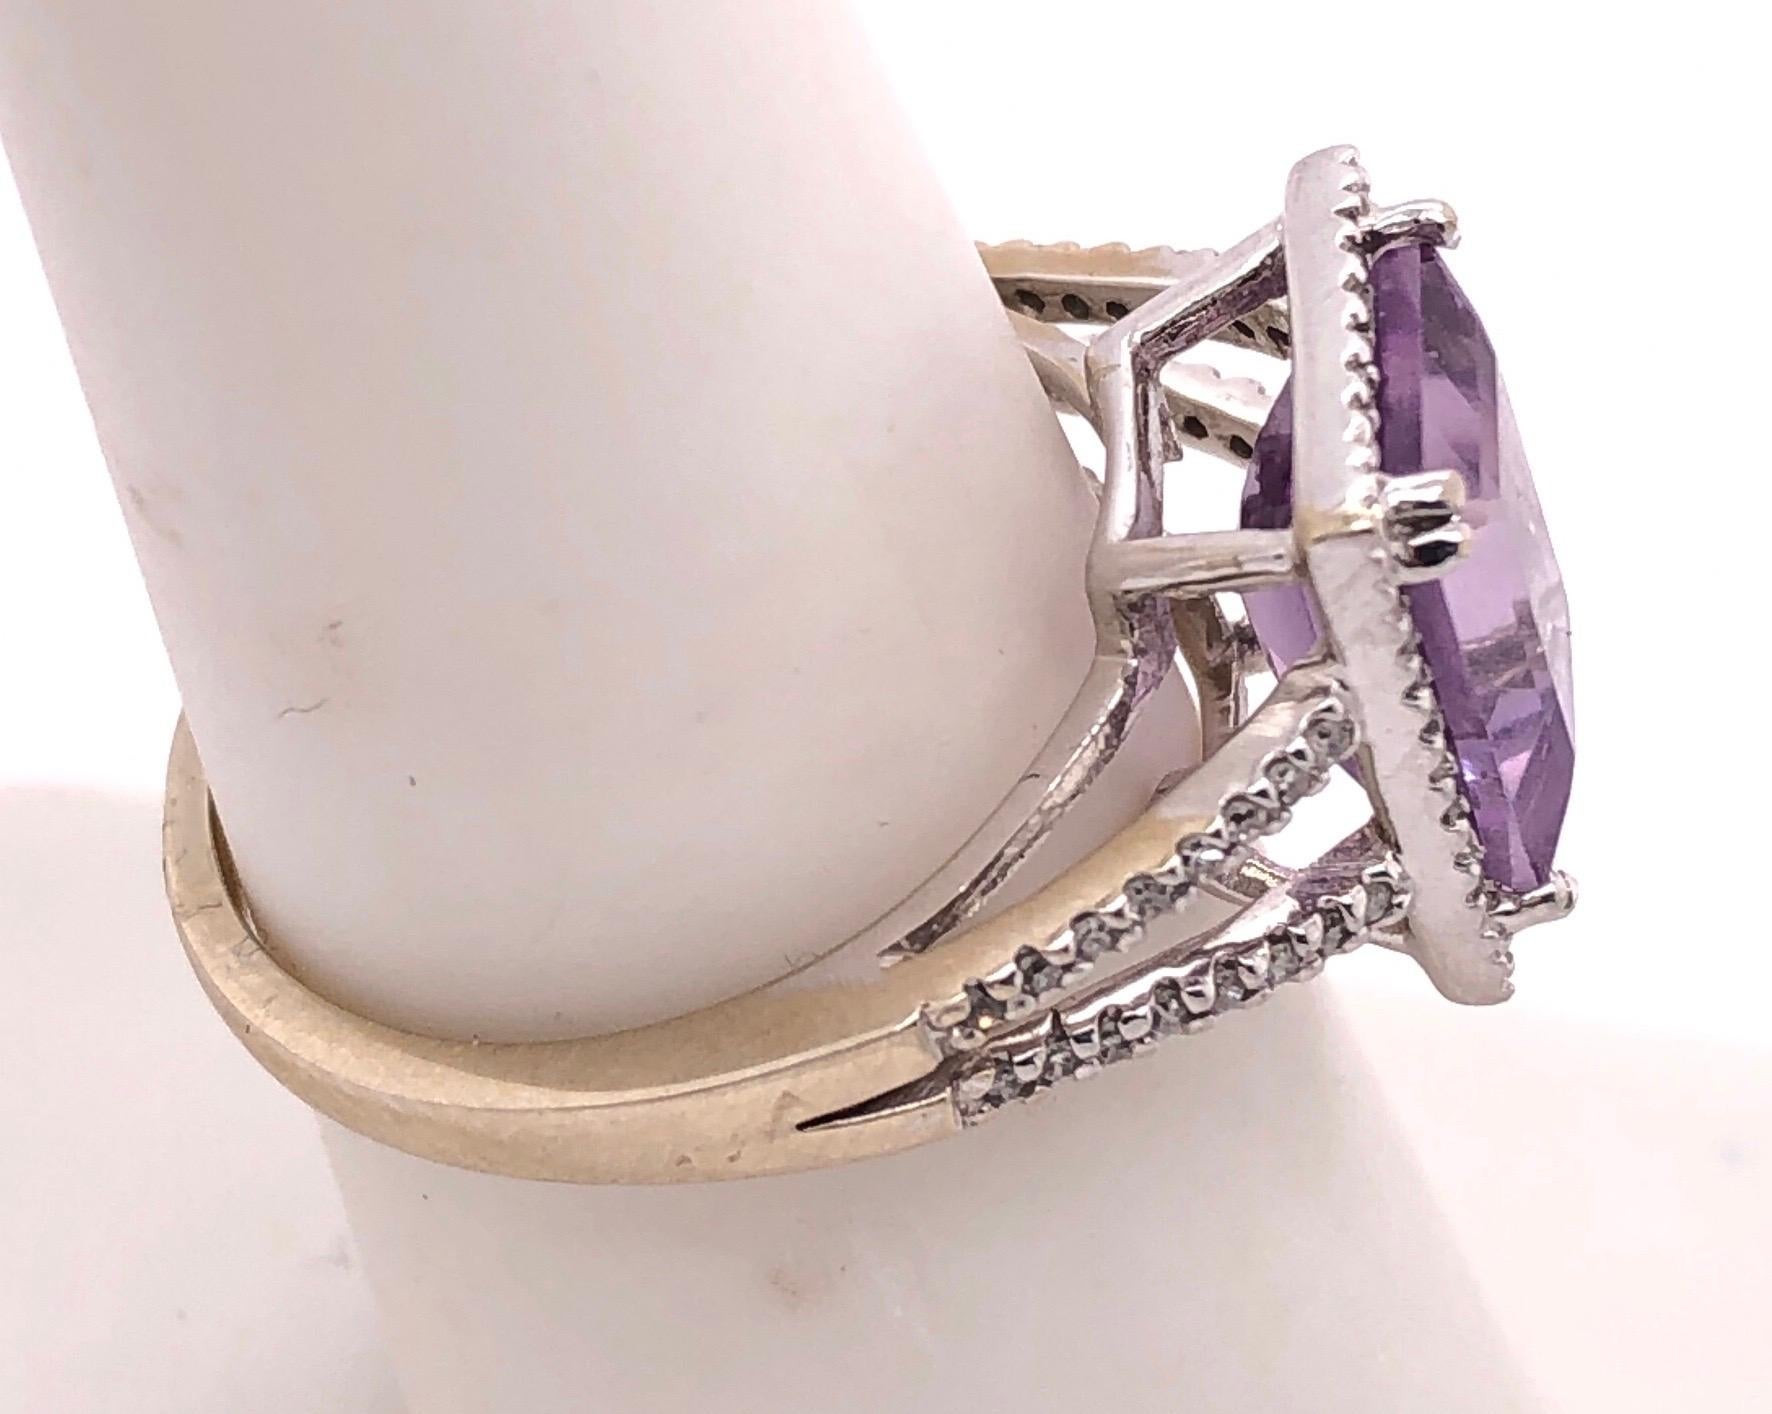 14 Karat White Gold Fashion Amethyst Ring with Diamonds In Good Condition For Sale In Stamford, CT